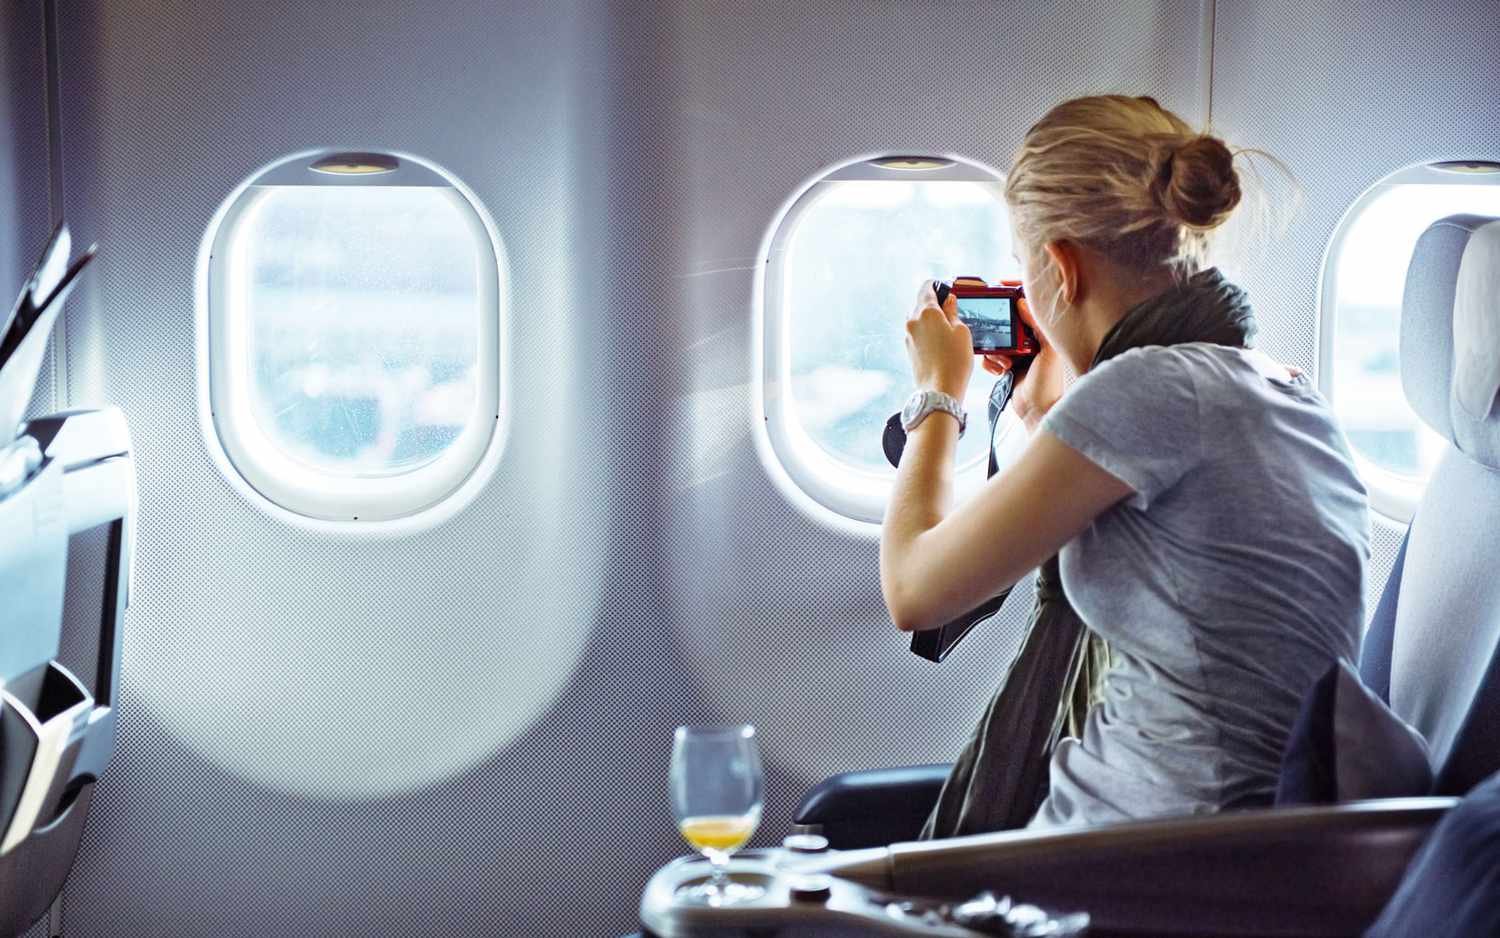 9 Air Travel Tips For A Completely Enjoyable Flight